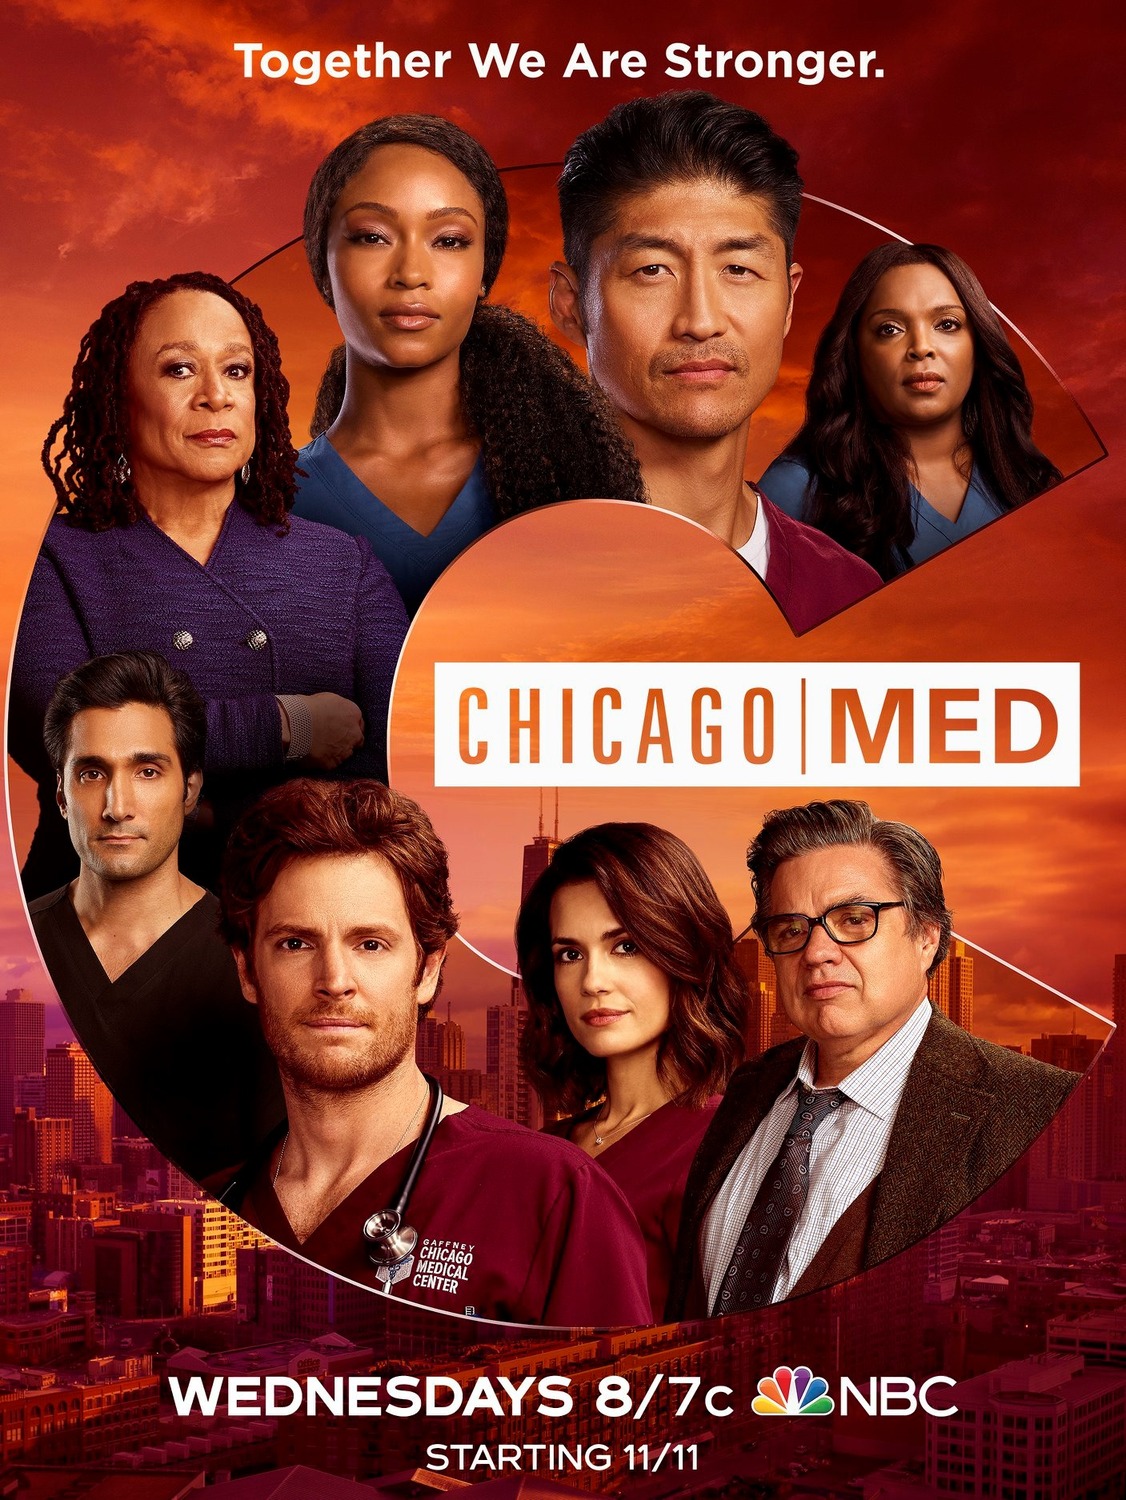 Extra Large TV Poster Image for Chicago Med (#3 of 4)